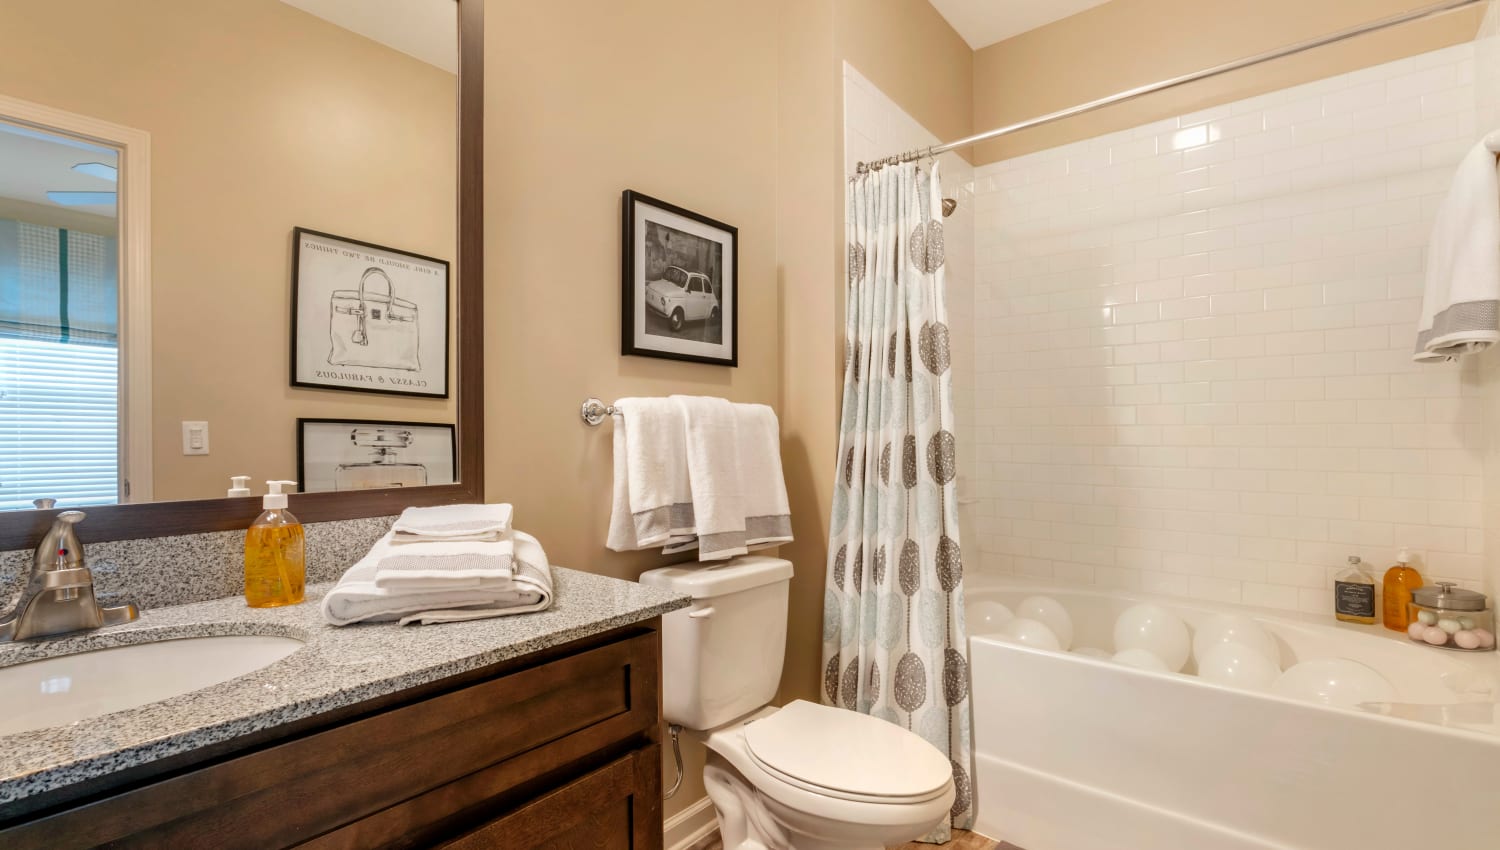 Bathroom with granite countertops and tiled shower at The Village at Apison Pike in Ooltewah, Tennessee